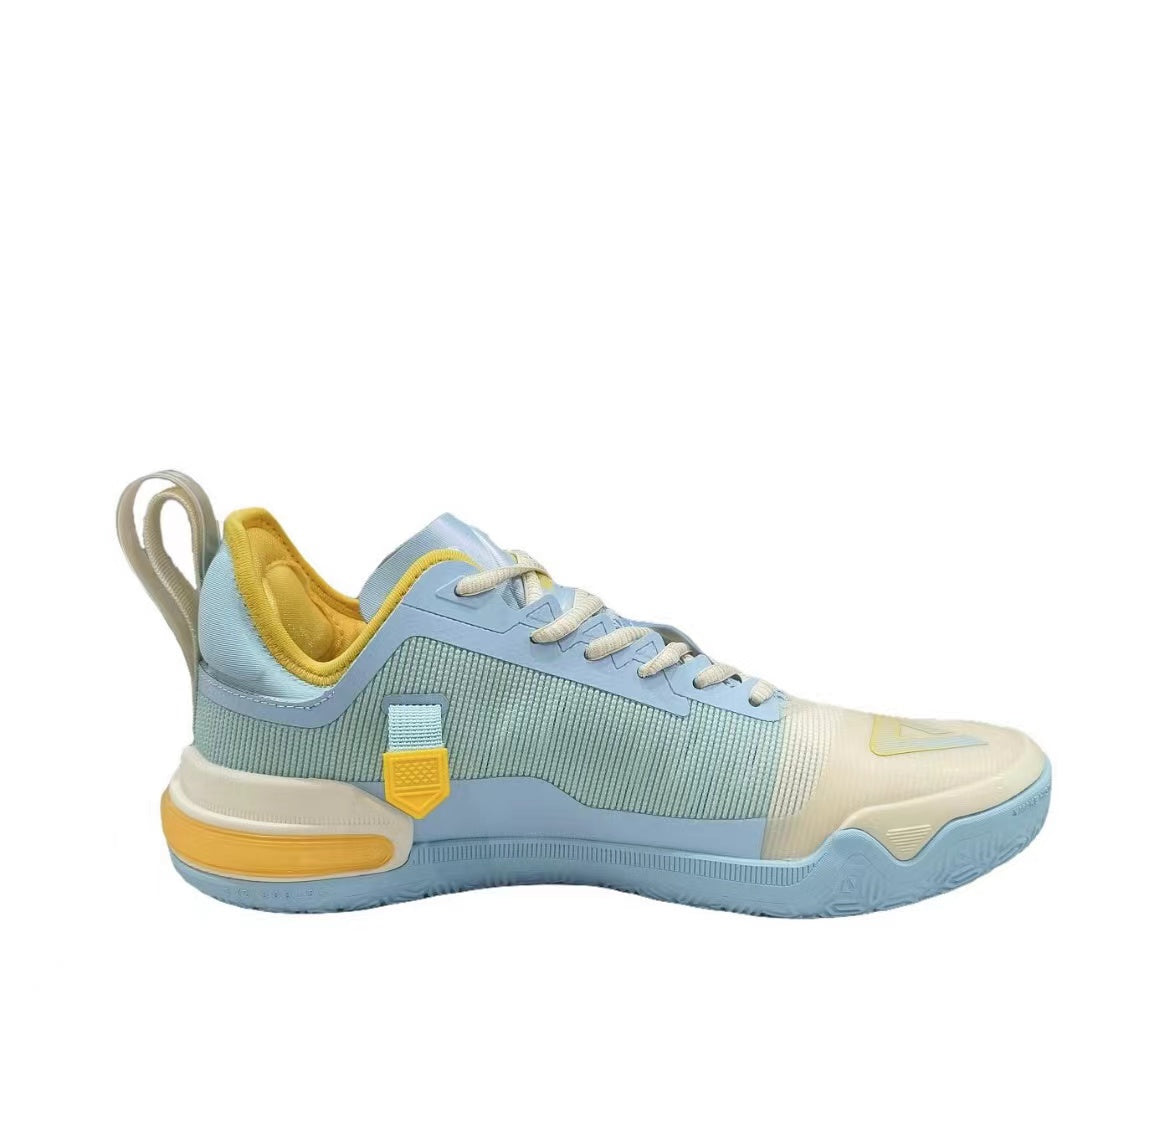 Peak Andrew Wiggins AW1 - Off White/Moon Orchid